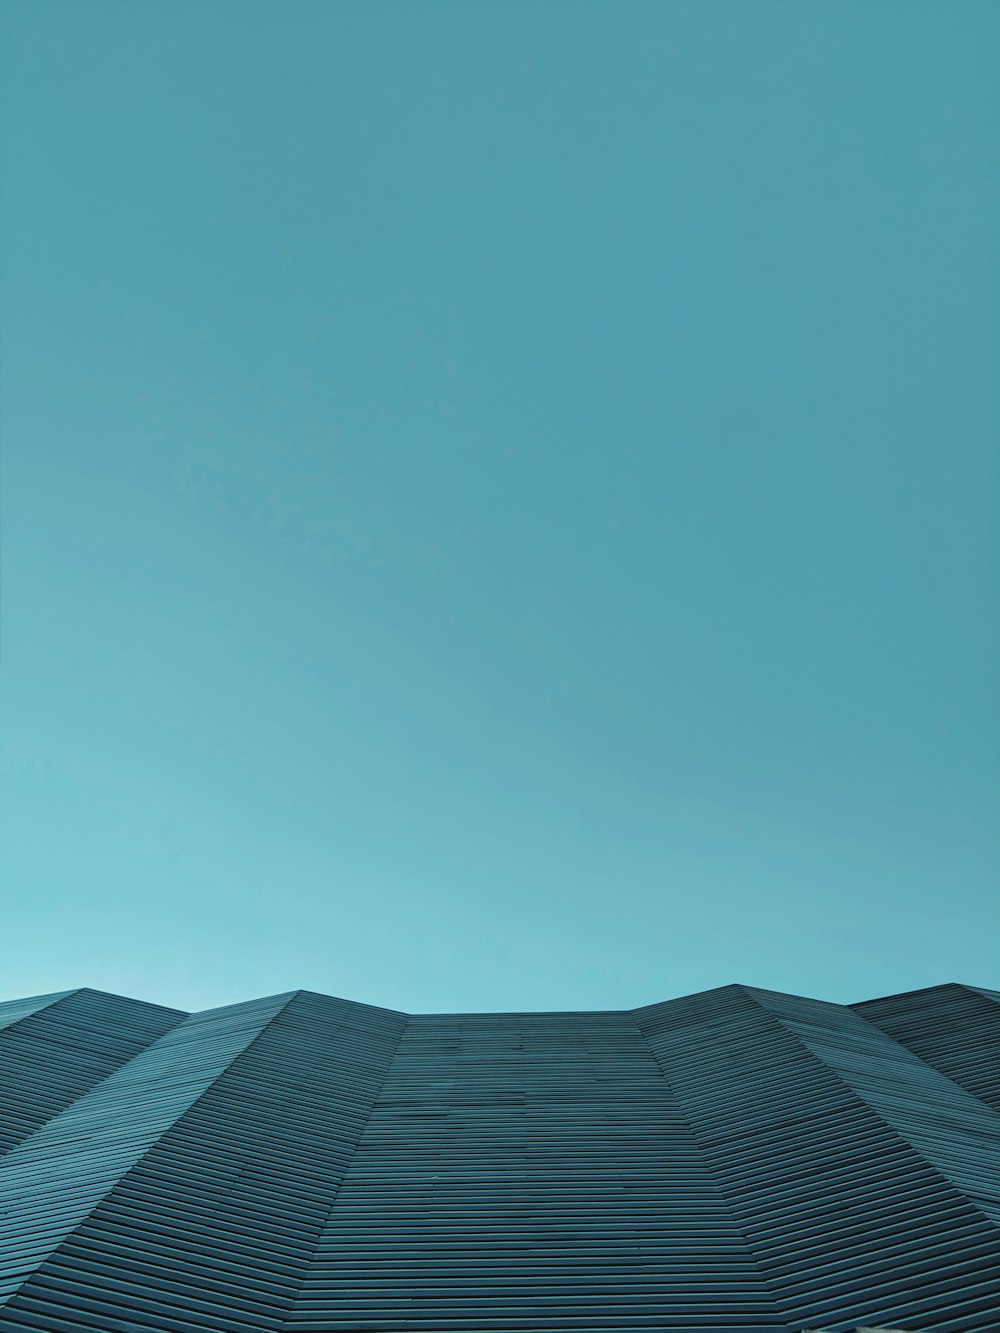 low-angle photography of gray structure under calm blue sky